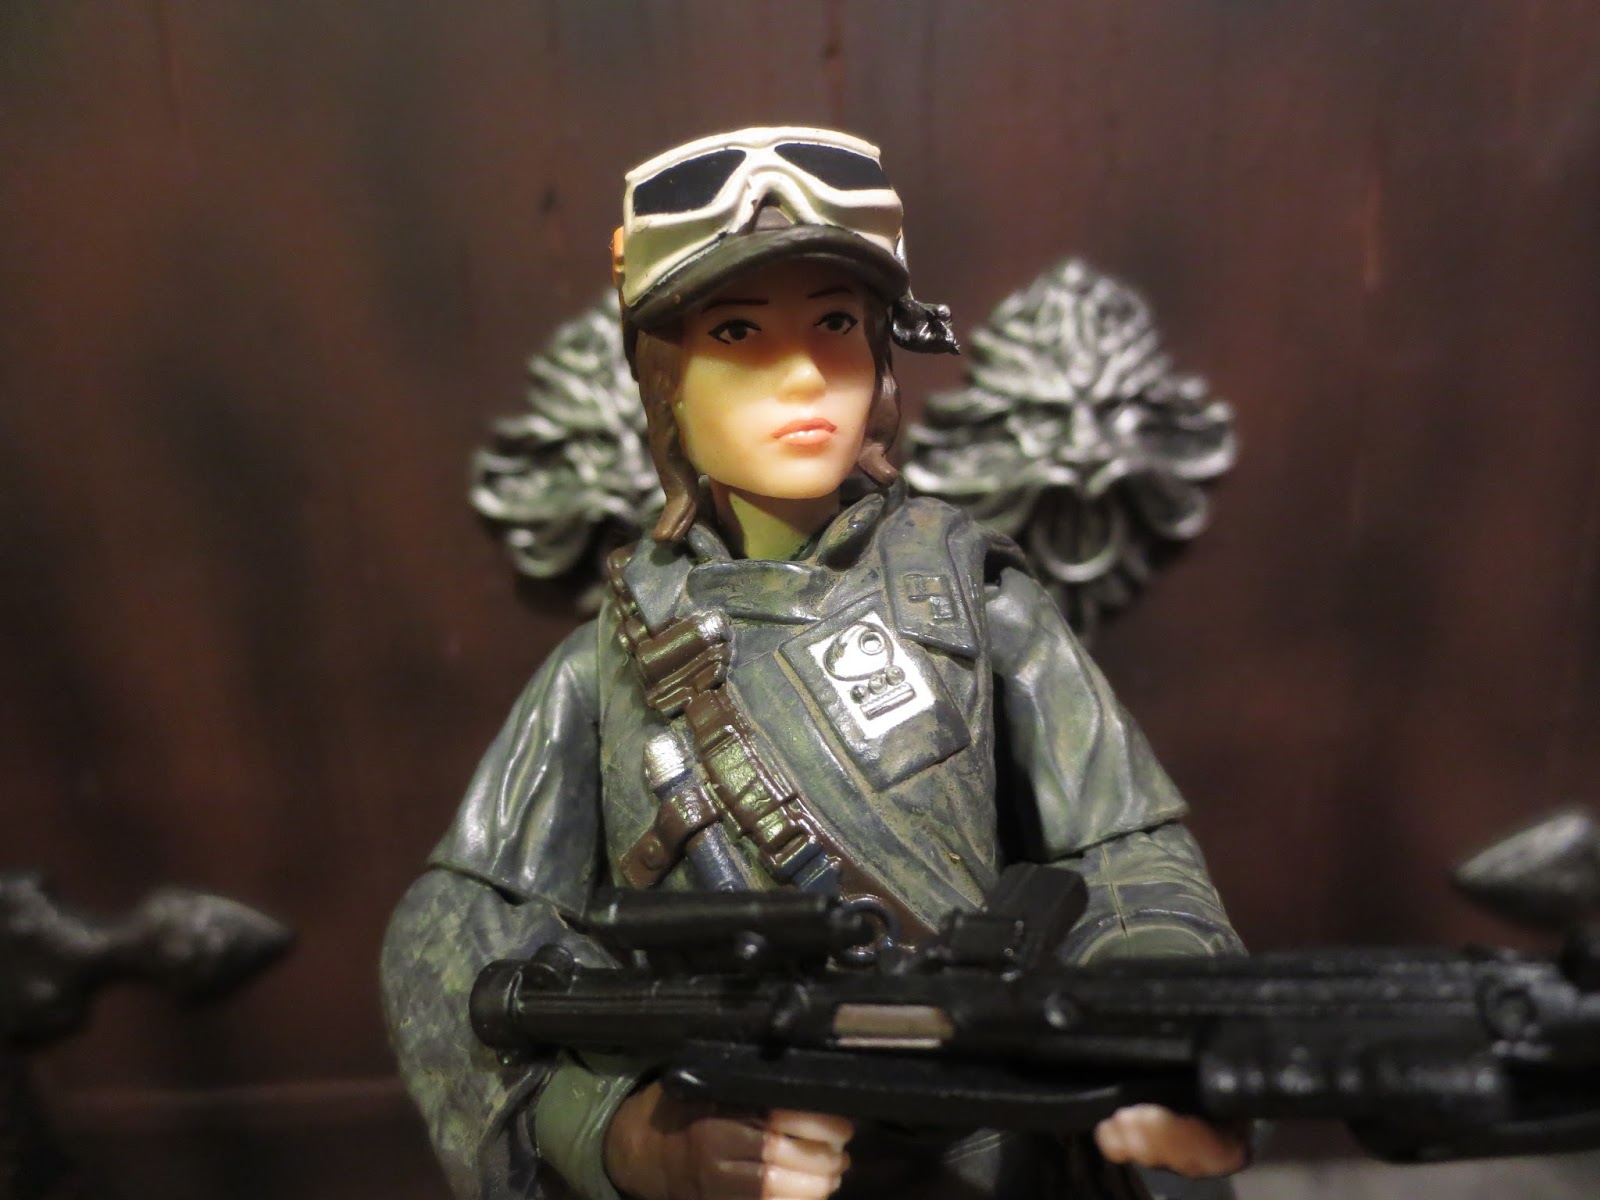 Action Figure Barbecue Road To Rogue One Sergeant Jyn Erso Eadu Images, Photos, Reviews